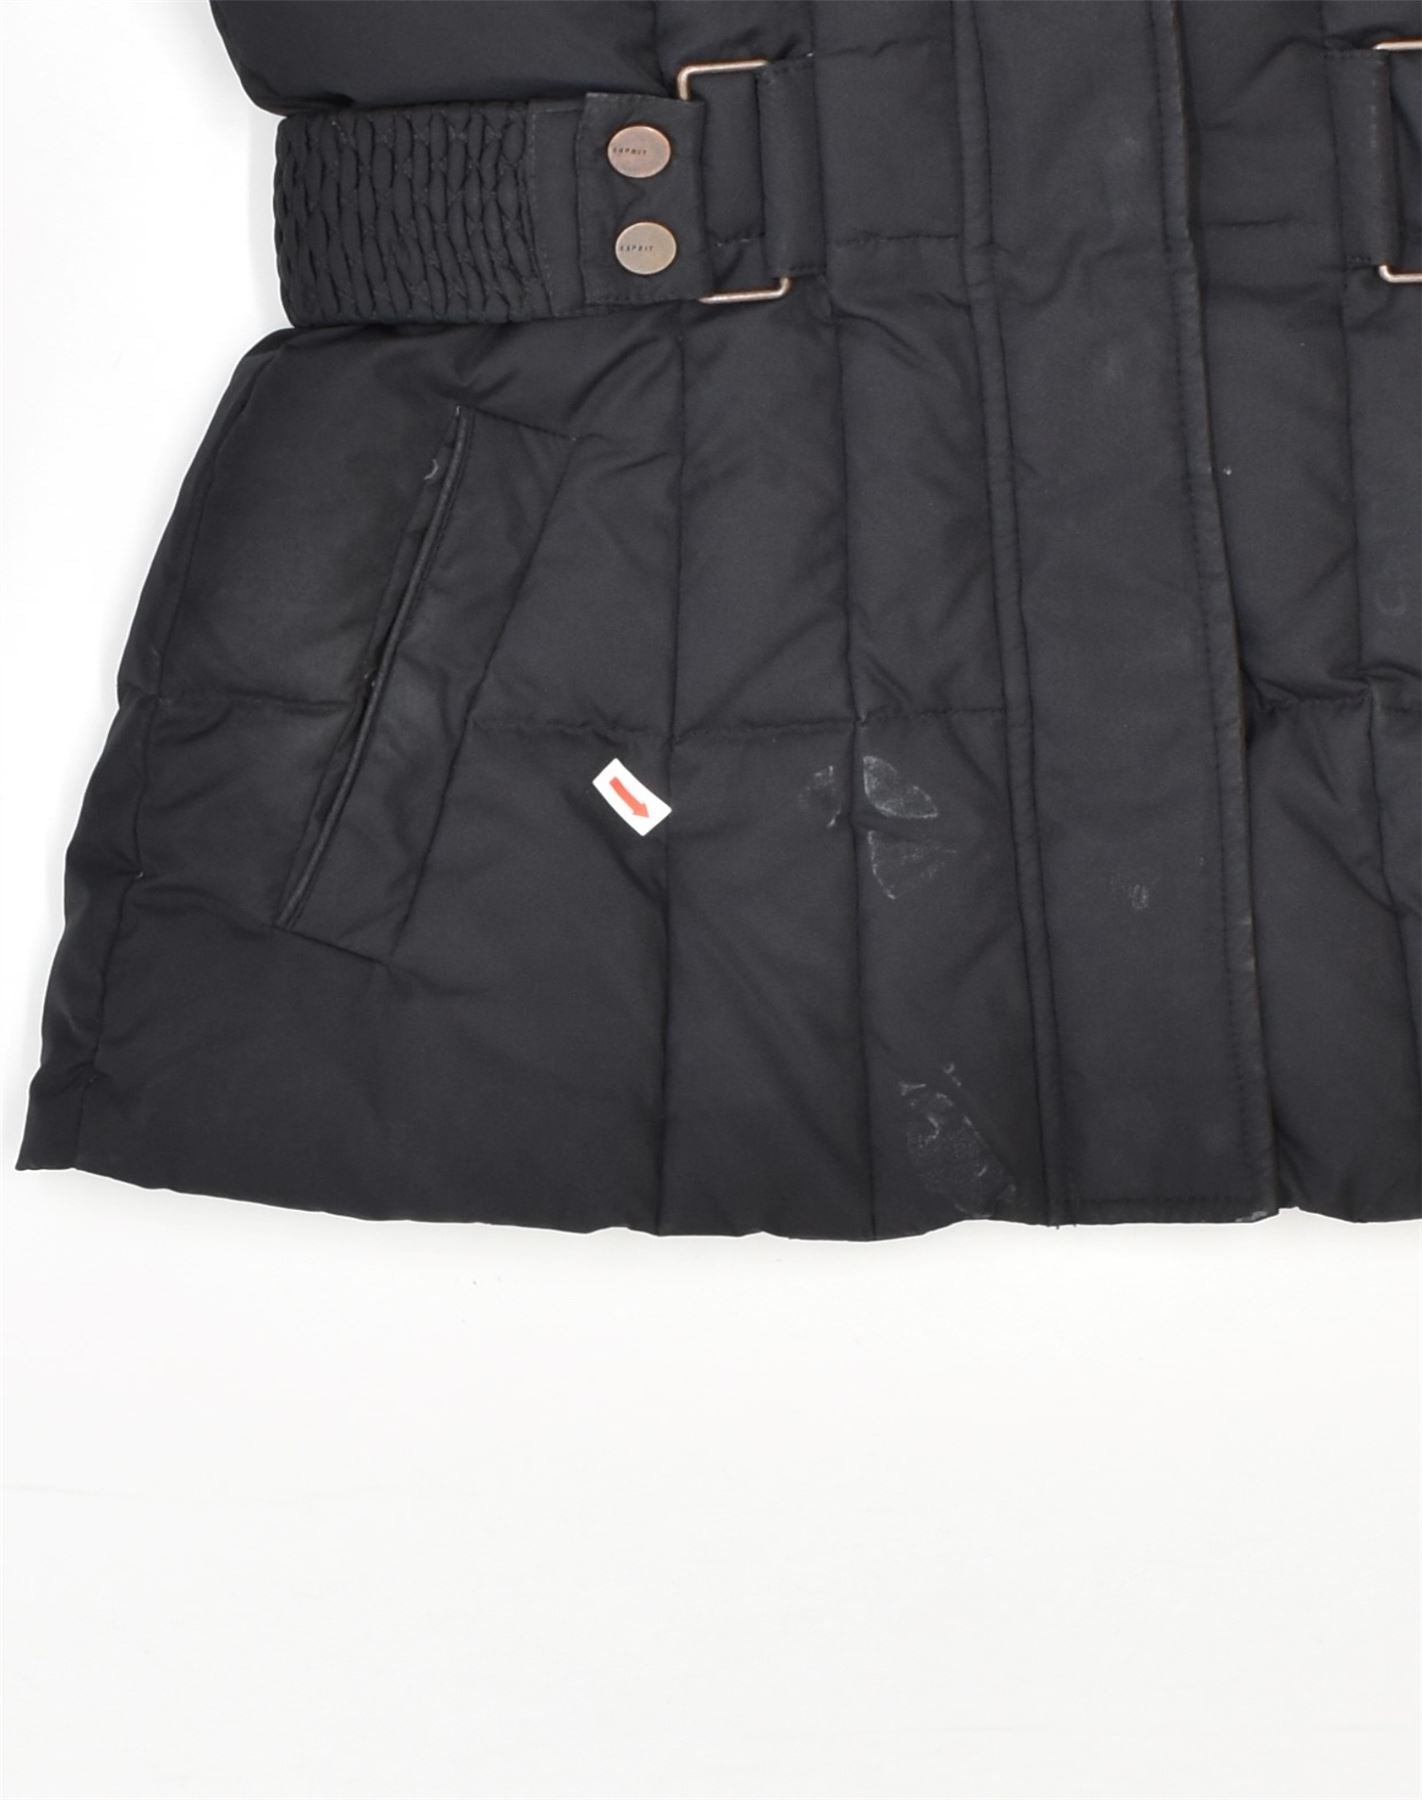 ESPRIT Womens Hooded Padded Jacket UK 8 Small Brown Polyester, Vintage &  Second-Hand Clothing Online